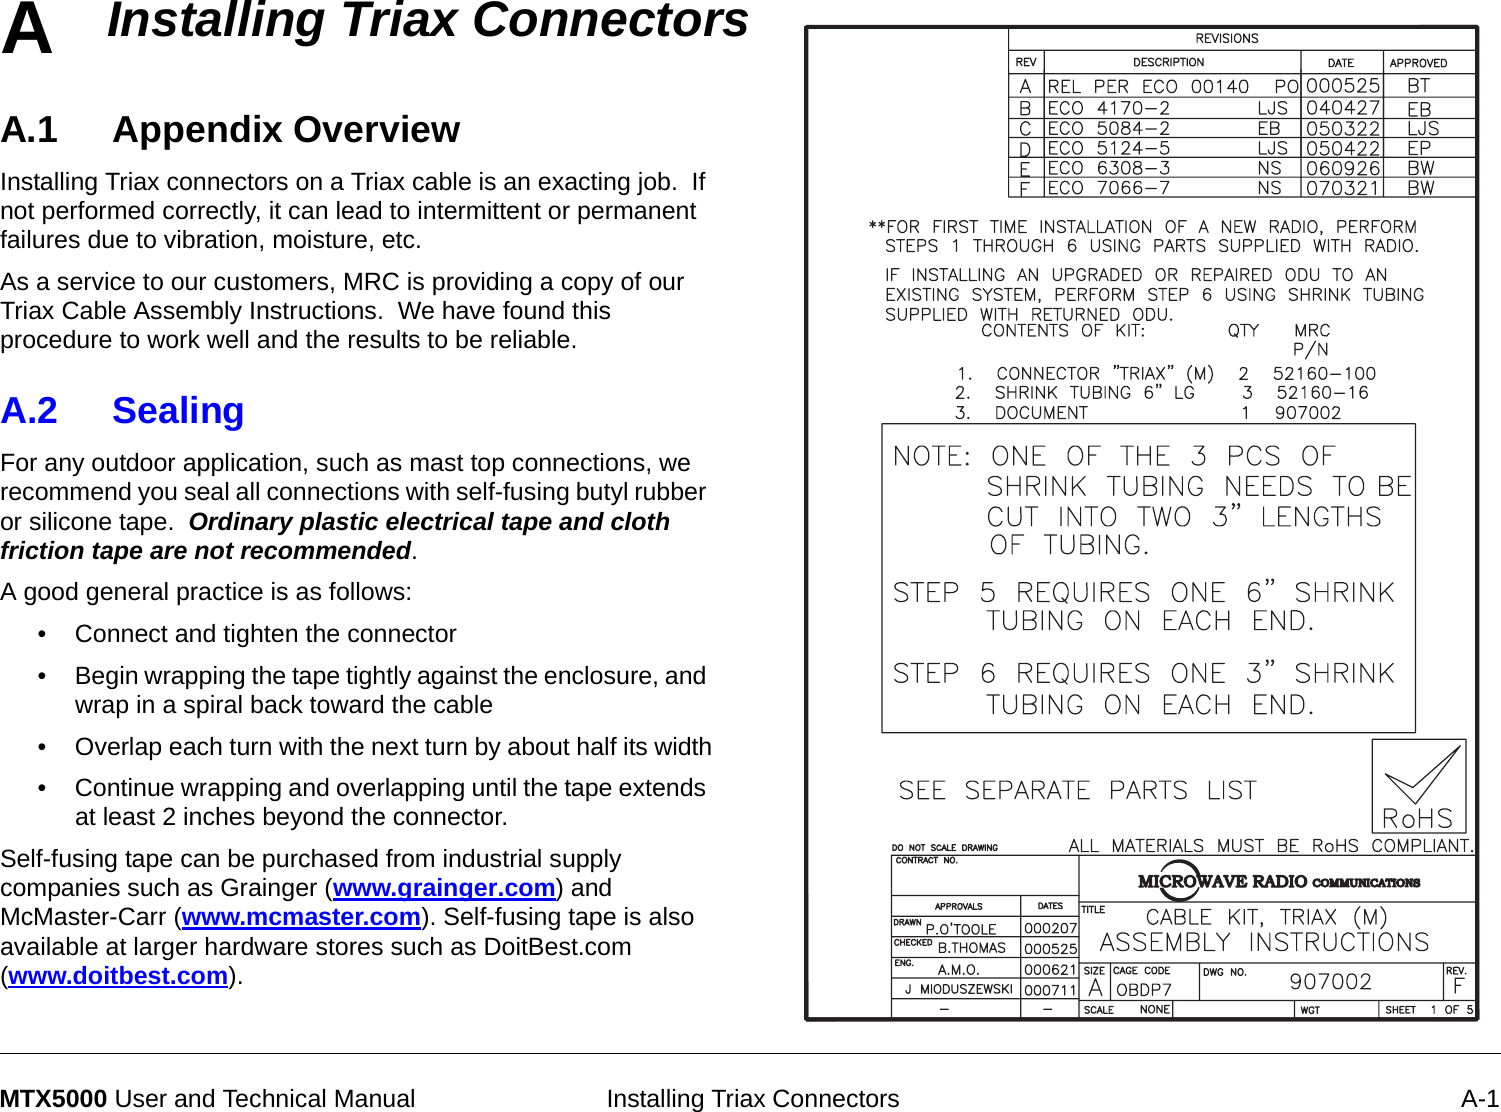 A Installing Triax Connectors A-1MTX5000 User and Technical ManualInstalling Triax ConnectorsA.1 Appendix OverviewInstalling Triax connectors on a Triax cable is an exacting job.  If not performed correctly, it can lead to intermittent or permanent failures due to vibration, moisture, etc.As a service to our customers, MRC is providing a copy of our Triax Cable Assembly Instructions.  We have found this procedure to work well and the results to be reliable. A.2 SealingFor any outdoor application, such as mast top connections, we recommend you seal all connections with self-fusing butyl rubber or silicone tape.  Ordinary plastic electrical tape and cloth friction tape are not recommended. A good general practice is as follows:• Connect and tighten the connector• Begin wrapping the tape tightly against the enclosure, and wrap in a spiral back toward the cable• Overlap each turn with the next turn by about half its width• Continue wrapping and overlapping until the tape extends at least 2 inches beyond the connector.Self-fusing tape can be purchased from industrial supply companies such as Grainger (www.grainger.com) and McMaster-Carr (www.mcmaster.com). Self-fusing tape is also available at larger hardware stores such as DoitBest.com (www.doitbest.com).COMMUNICATIONSMICROWAVE RADIO